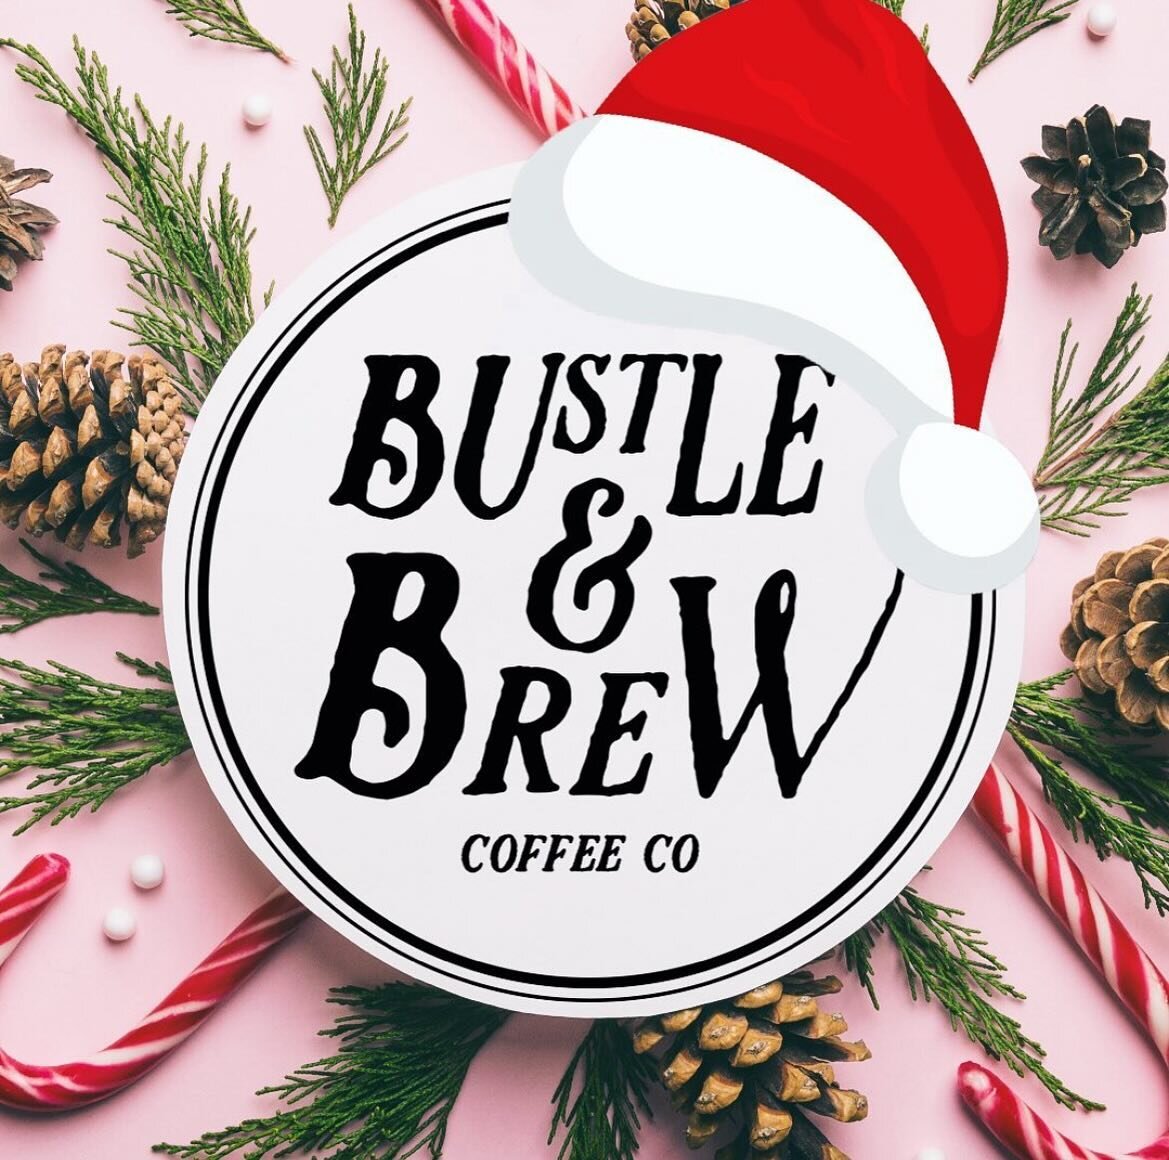 Merry Christmas from the Brew Crew! We hope your day was filled with joy, laughter, food, family and of course some caffeine! 

#merrychristmas #christmas #happyholidays #coffee #coffeetrailer #southflorida #cold #40degrees #floridawinter #delraybeac